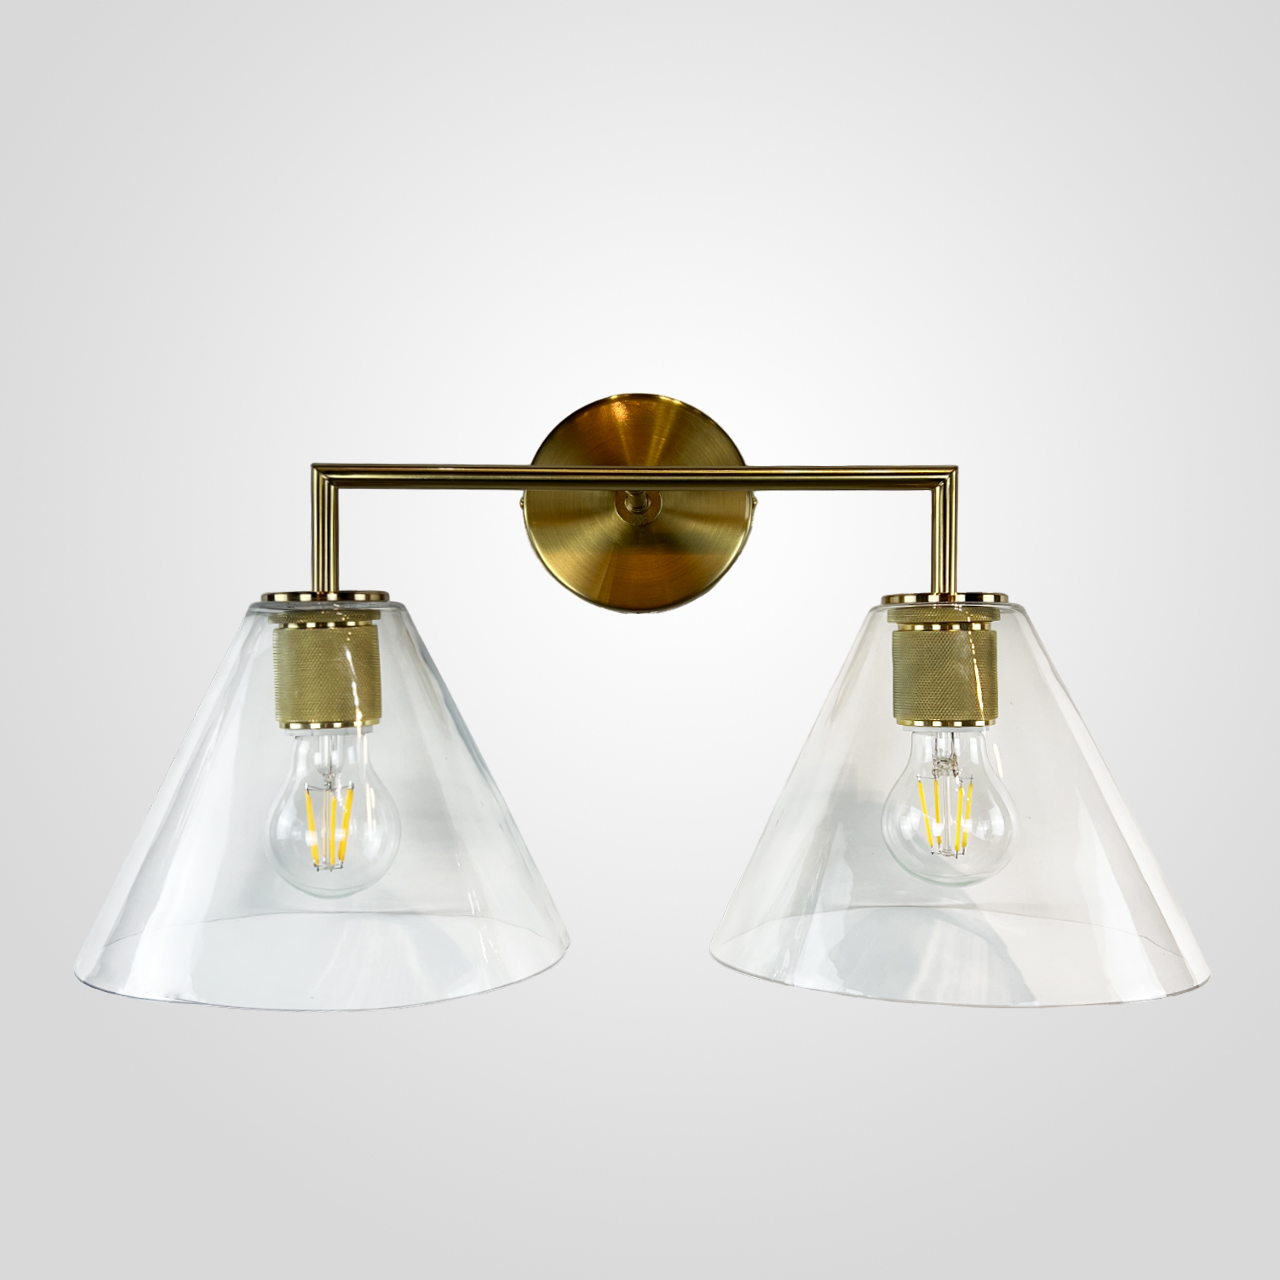 Бра Rh Utilitaire Funnel Shade Double Sconce Brass от Imperiumloft 123267-22